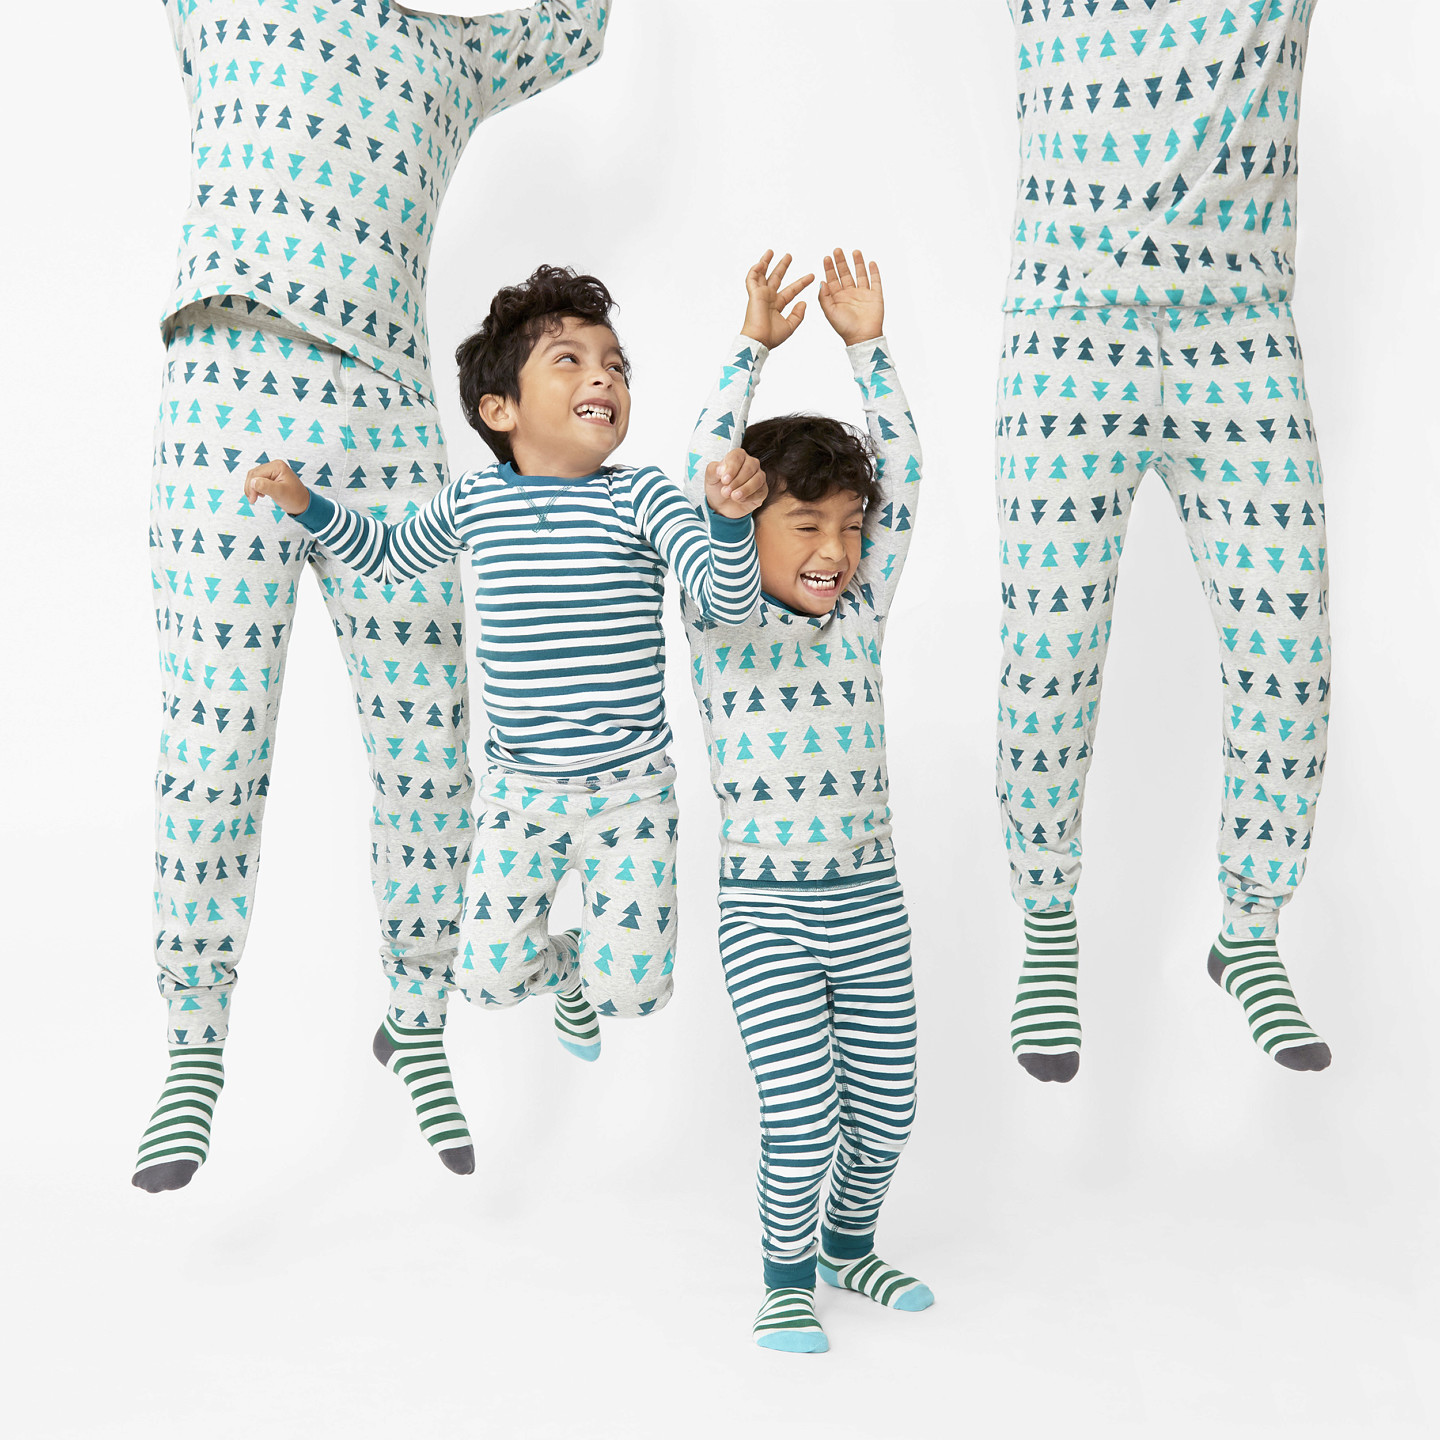 10 best holiday gifts for little kids 3-7 : Organic Christmas pajamas for the family | Small Business Holiday Gift Guide 2020